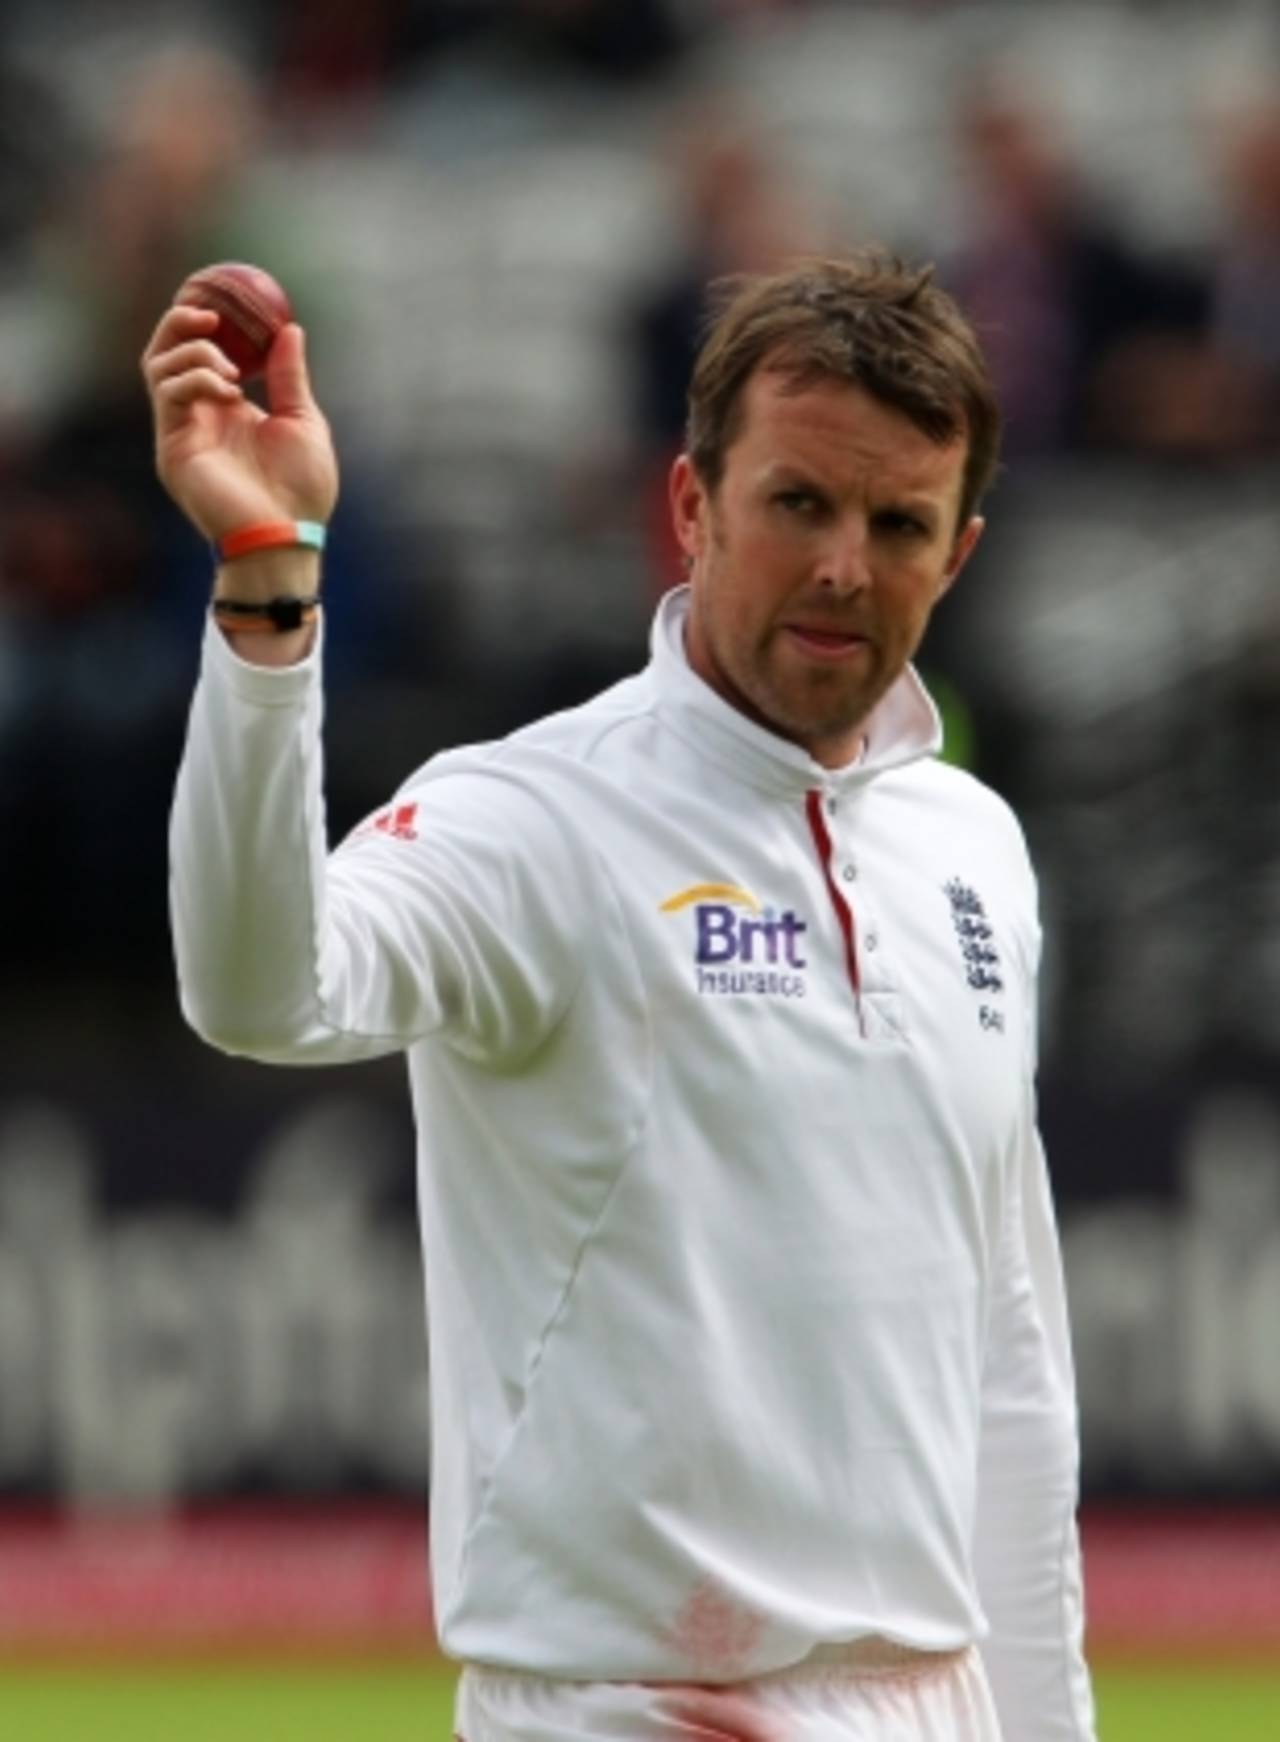 Graeme Swann took another five-wicket haul but it barely registered a mention at Lord's&nbsp;&nbsp;&bull;&nbsp;&nbsp;Getty Images